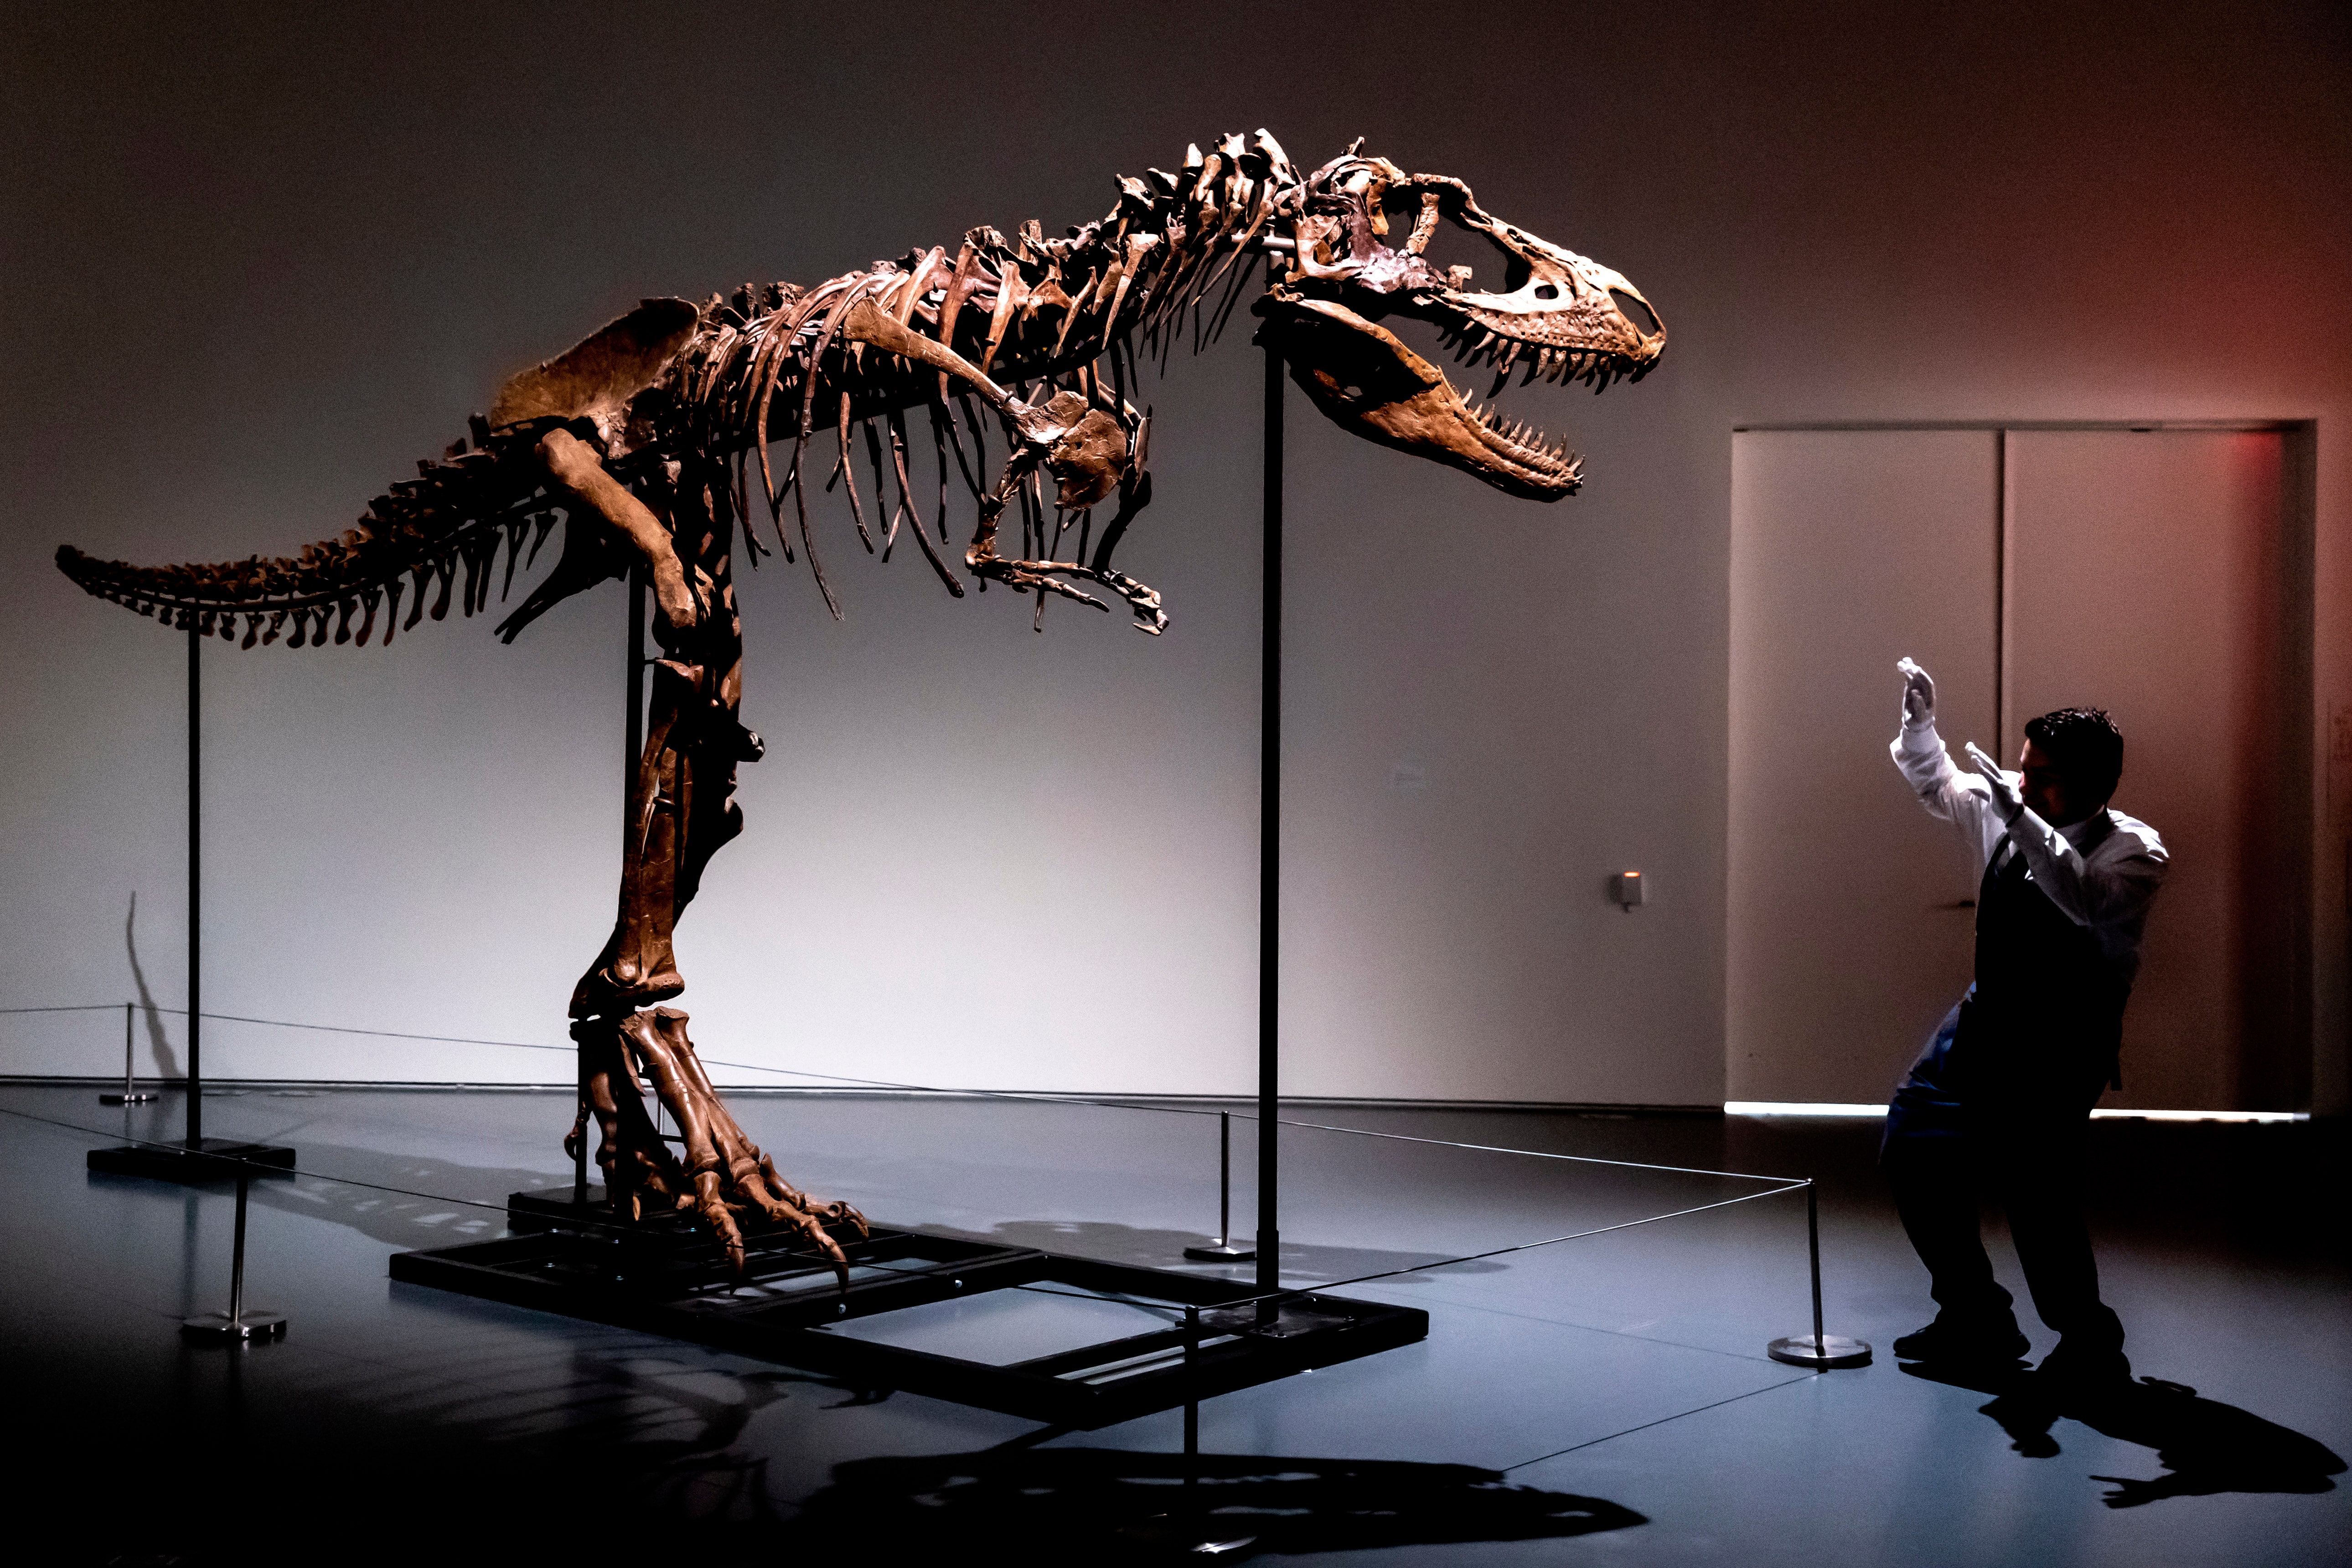 Dinosaur skeleton to be auctioned in NYC, fossil is 76 million-years-old